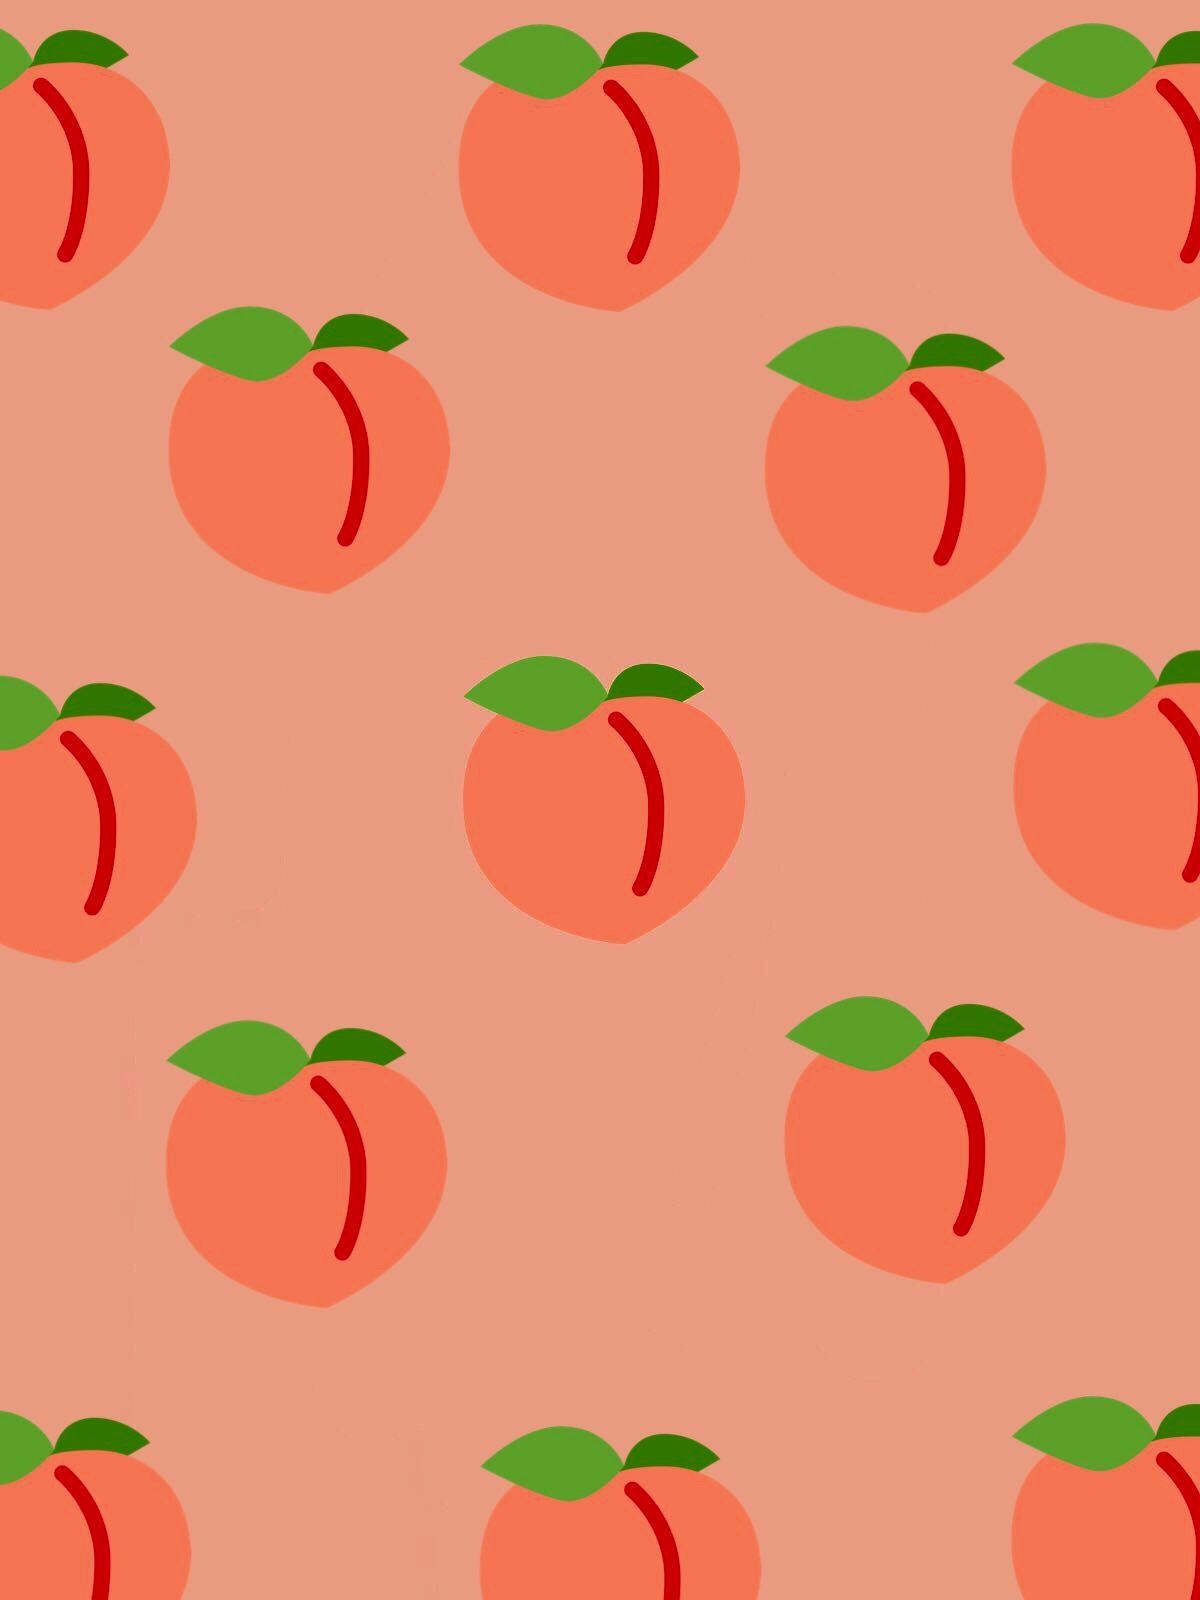 Repeating Peach Pattern Background